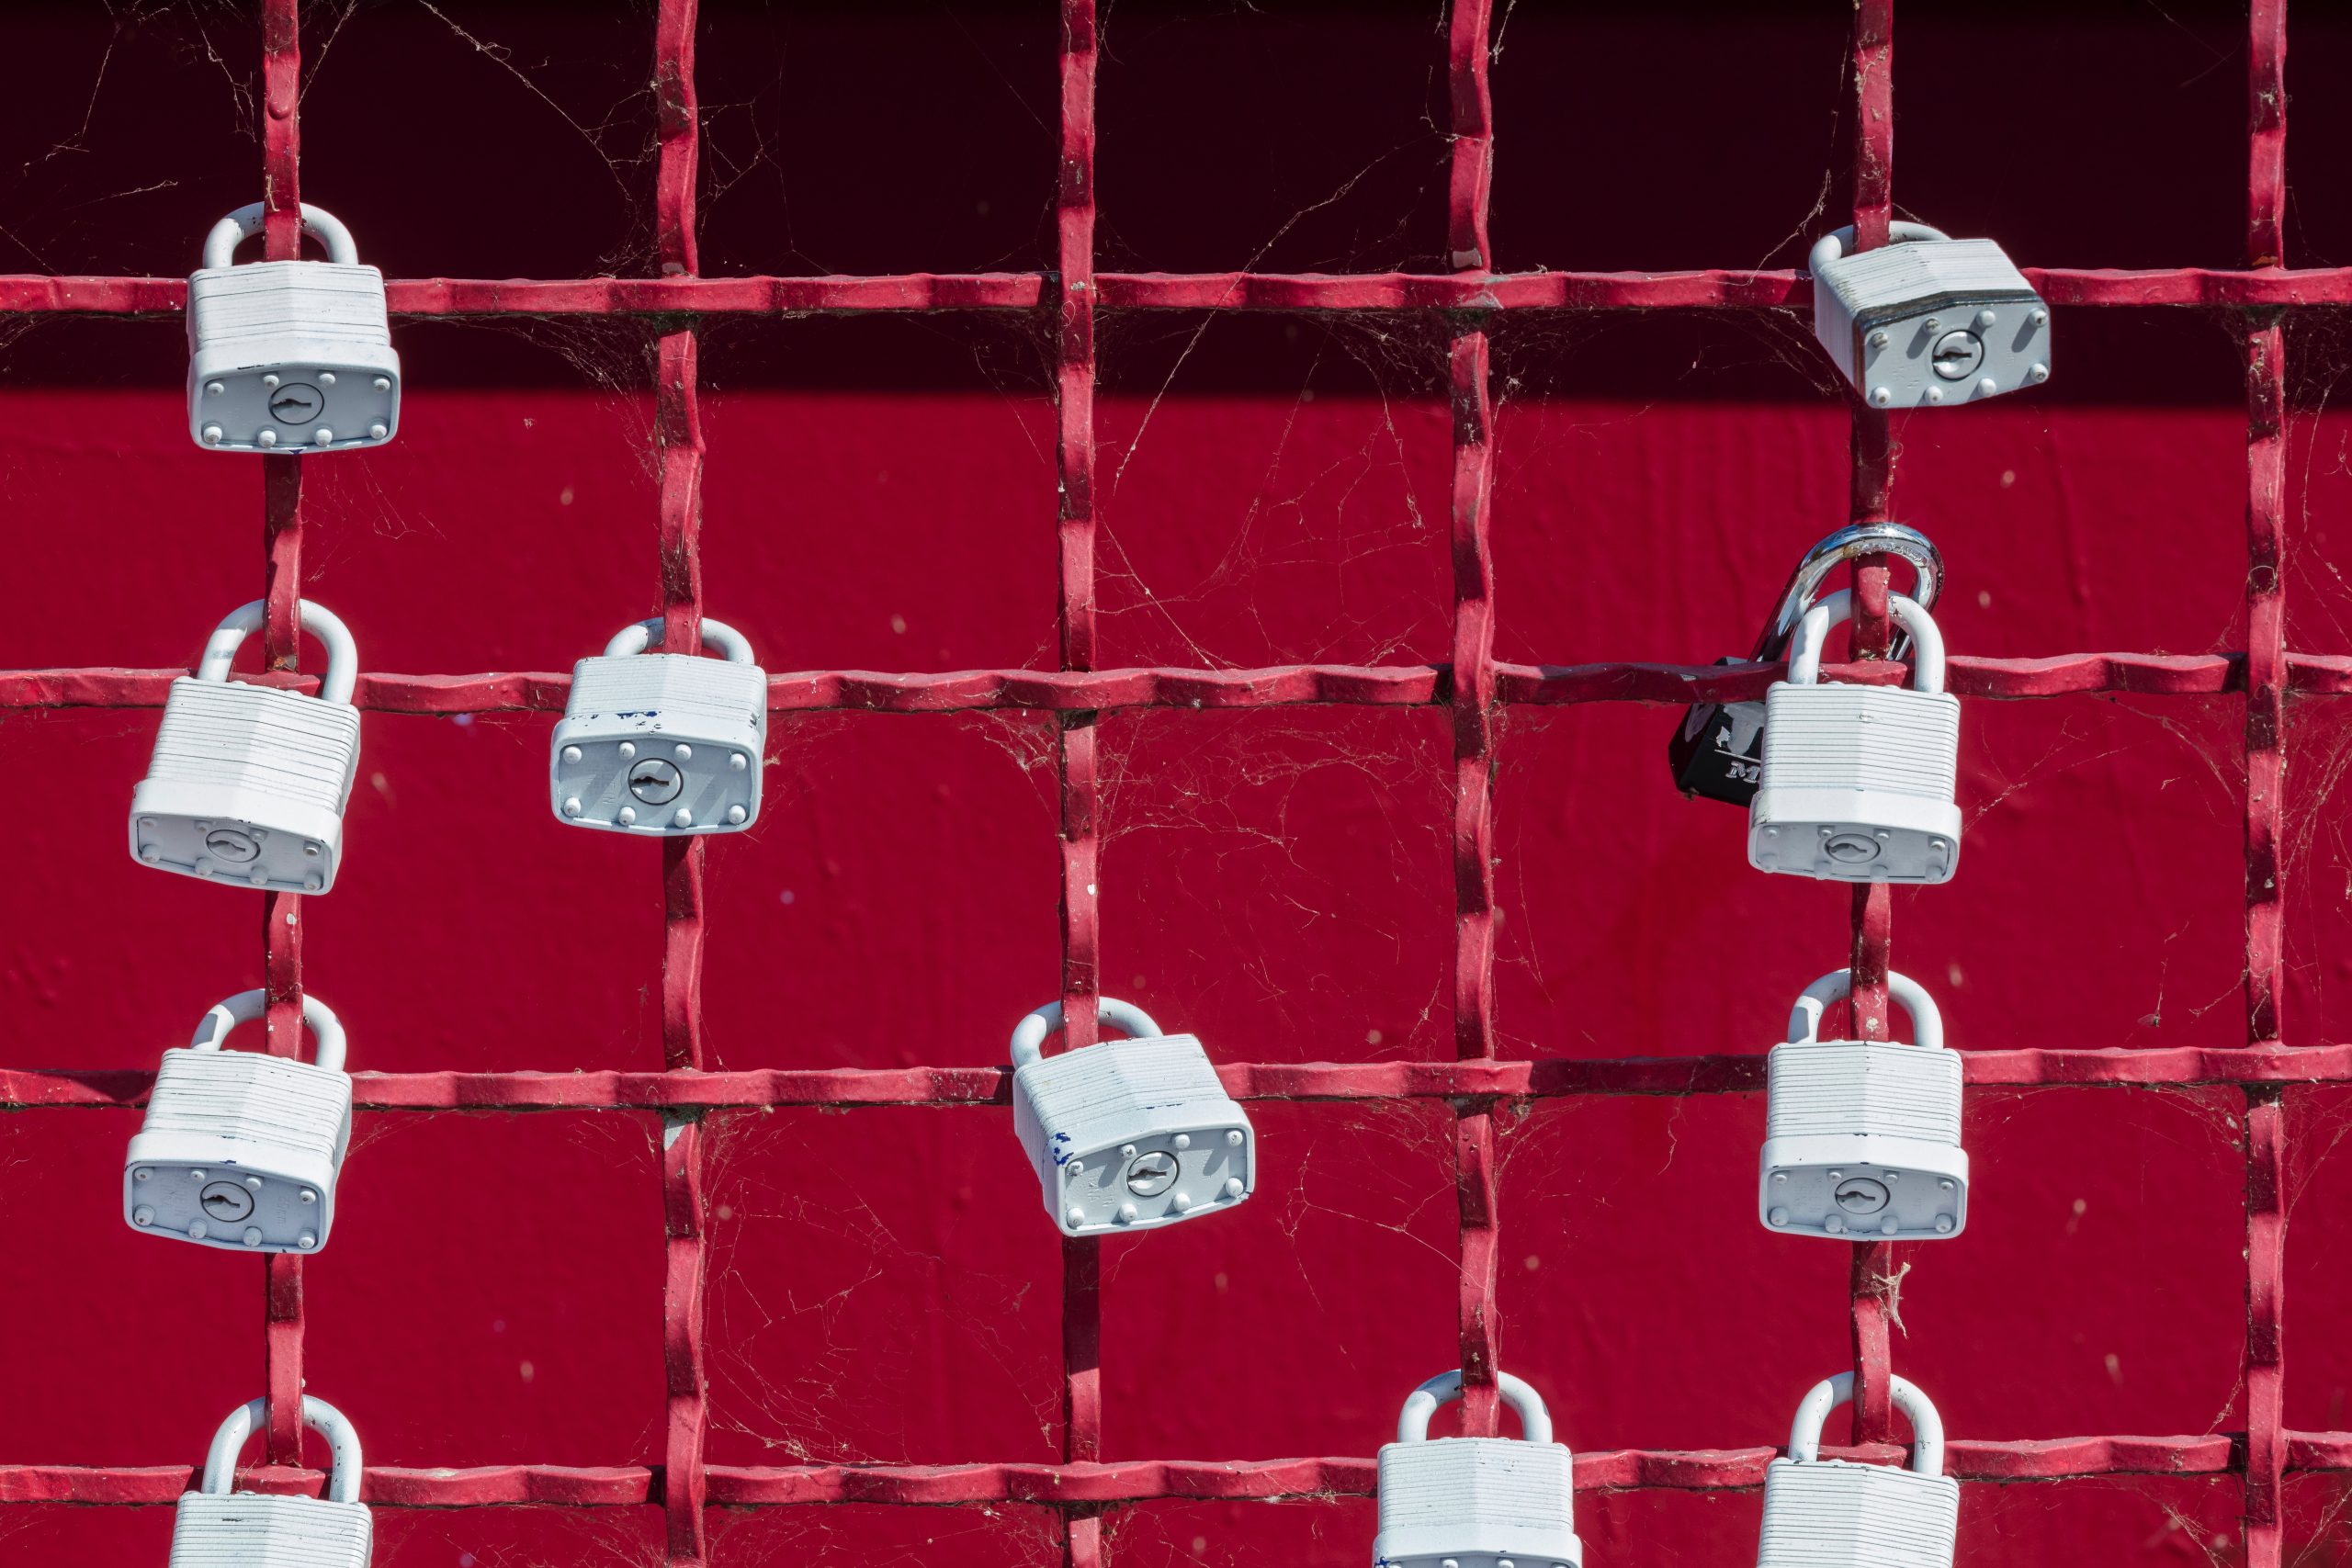 A gate with red paint and locks hanging off.